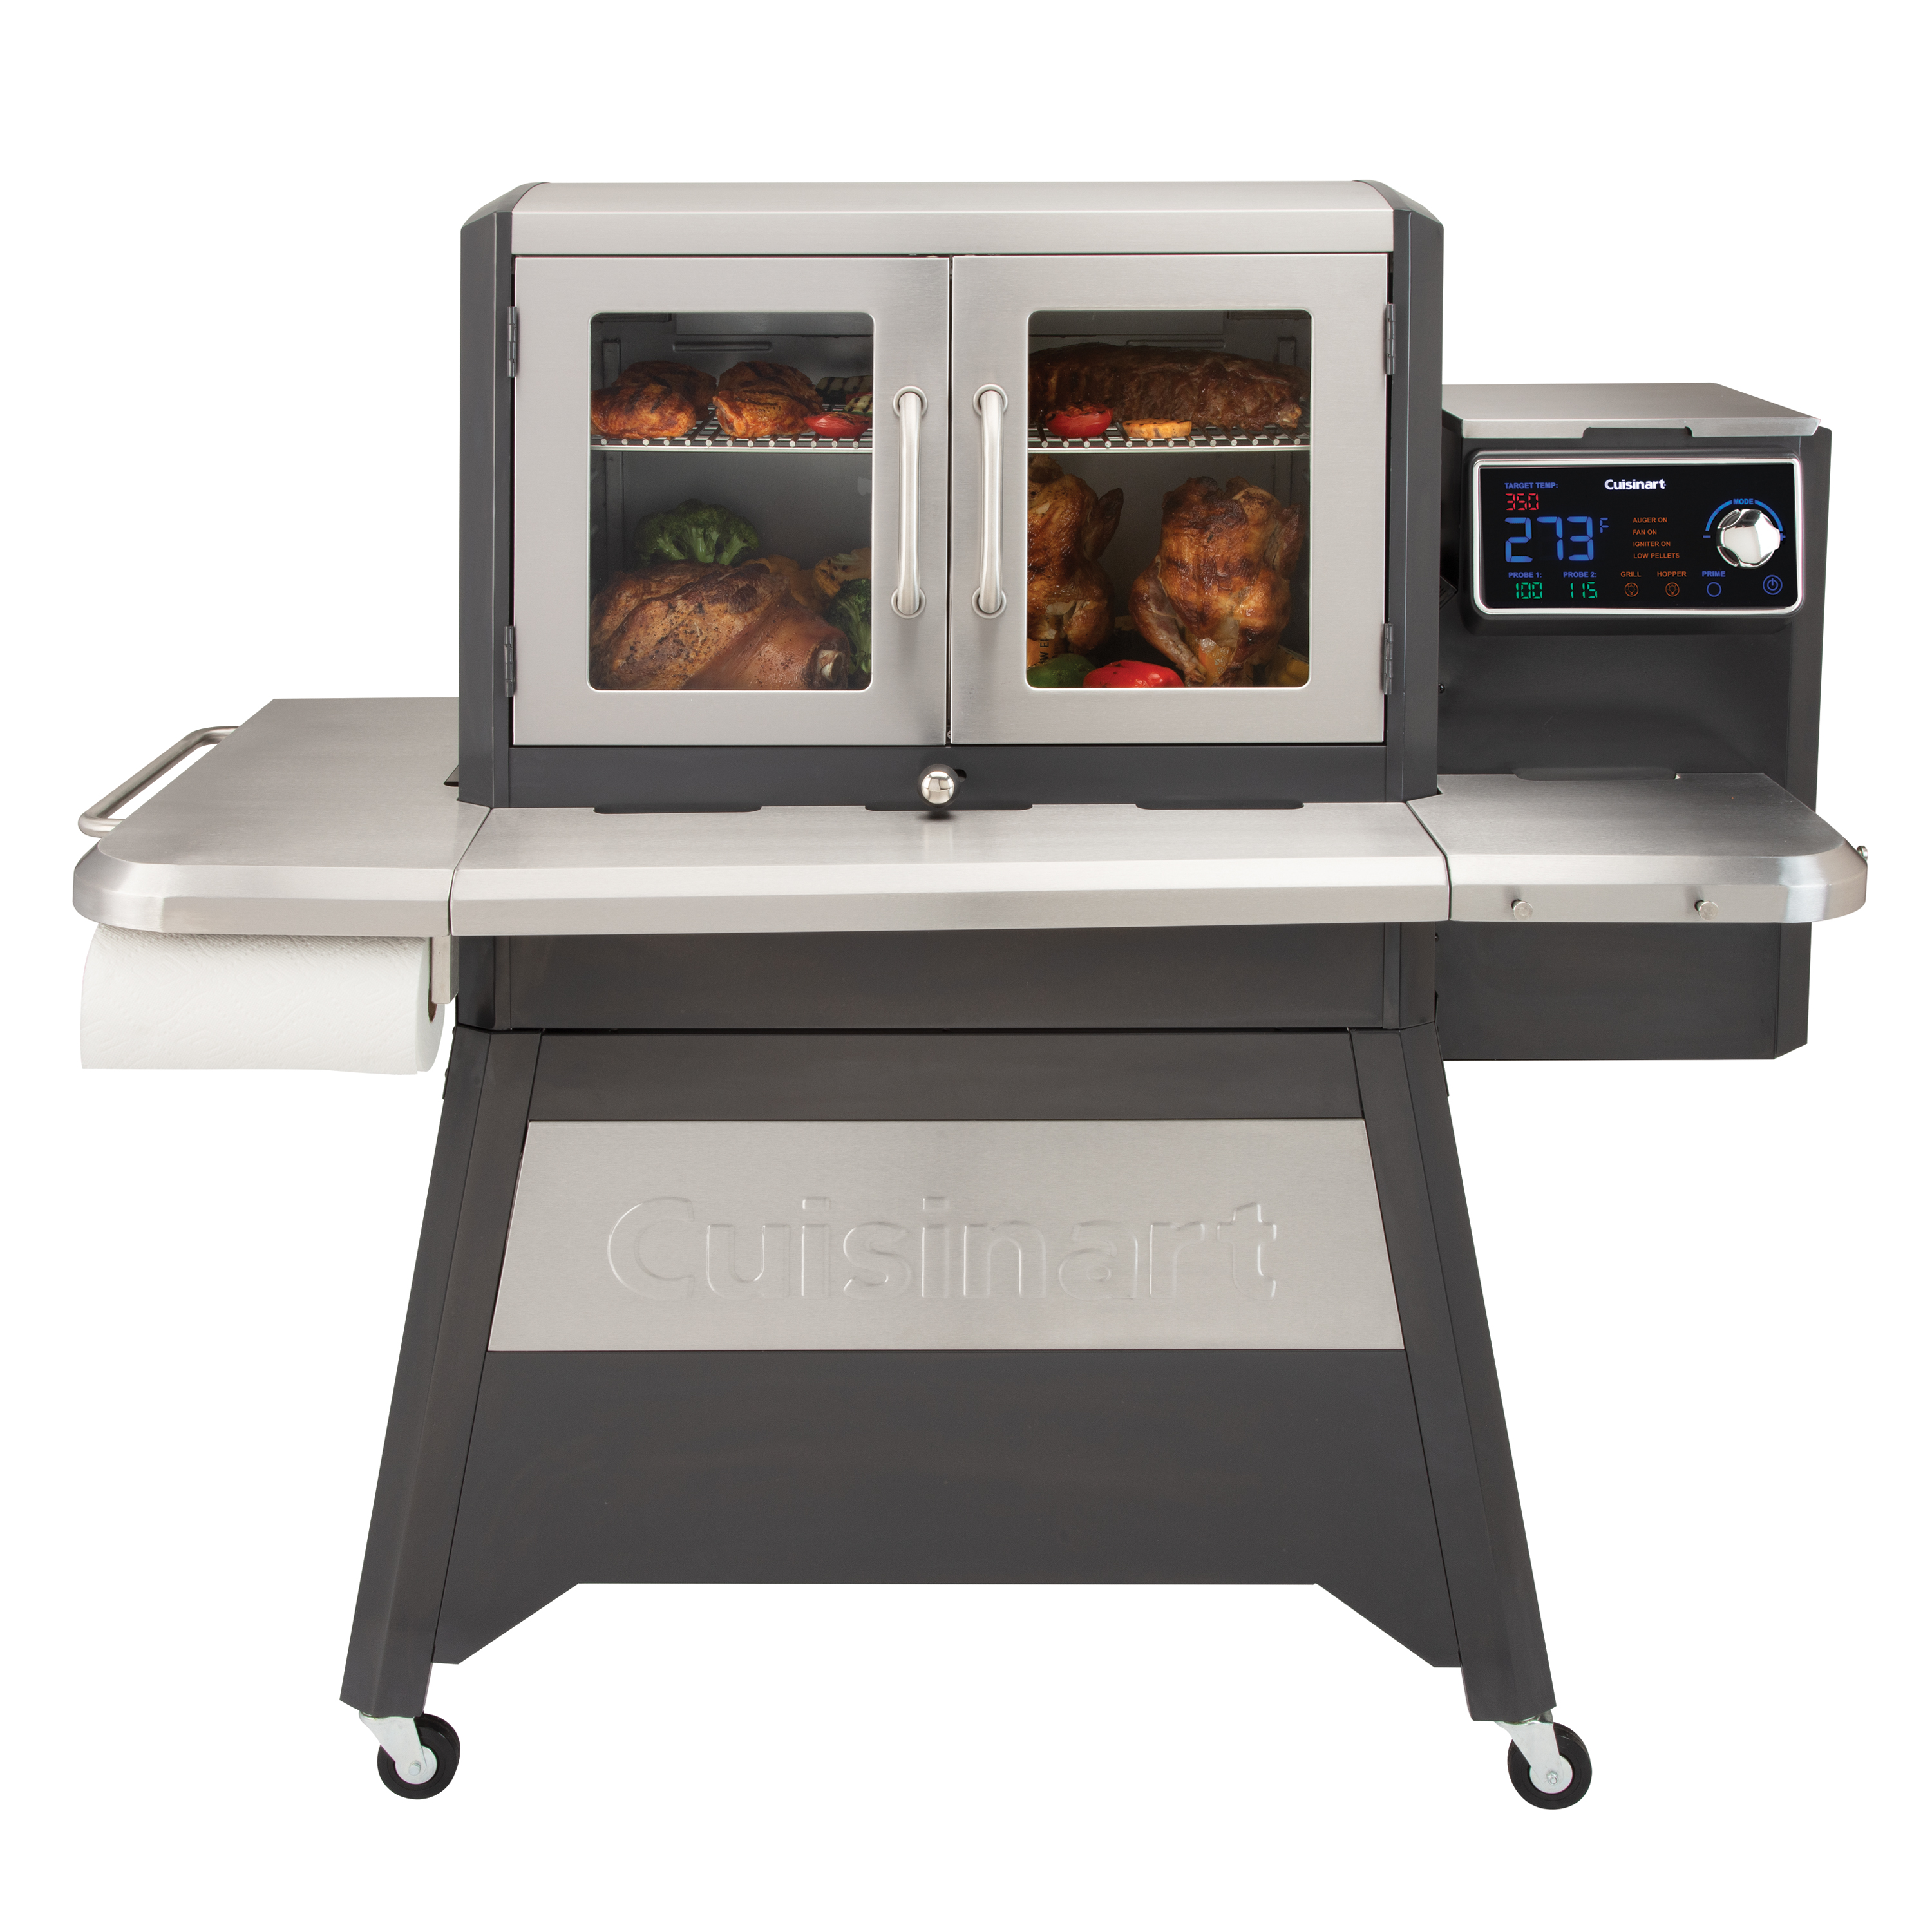 Cuisinart Clermont Pellet Grill - YMMV $348.50 at Walmart In-Store